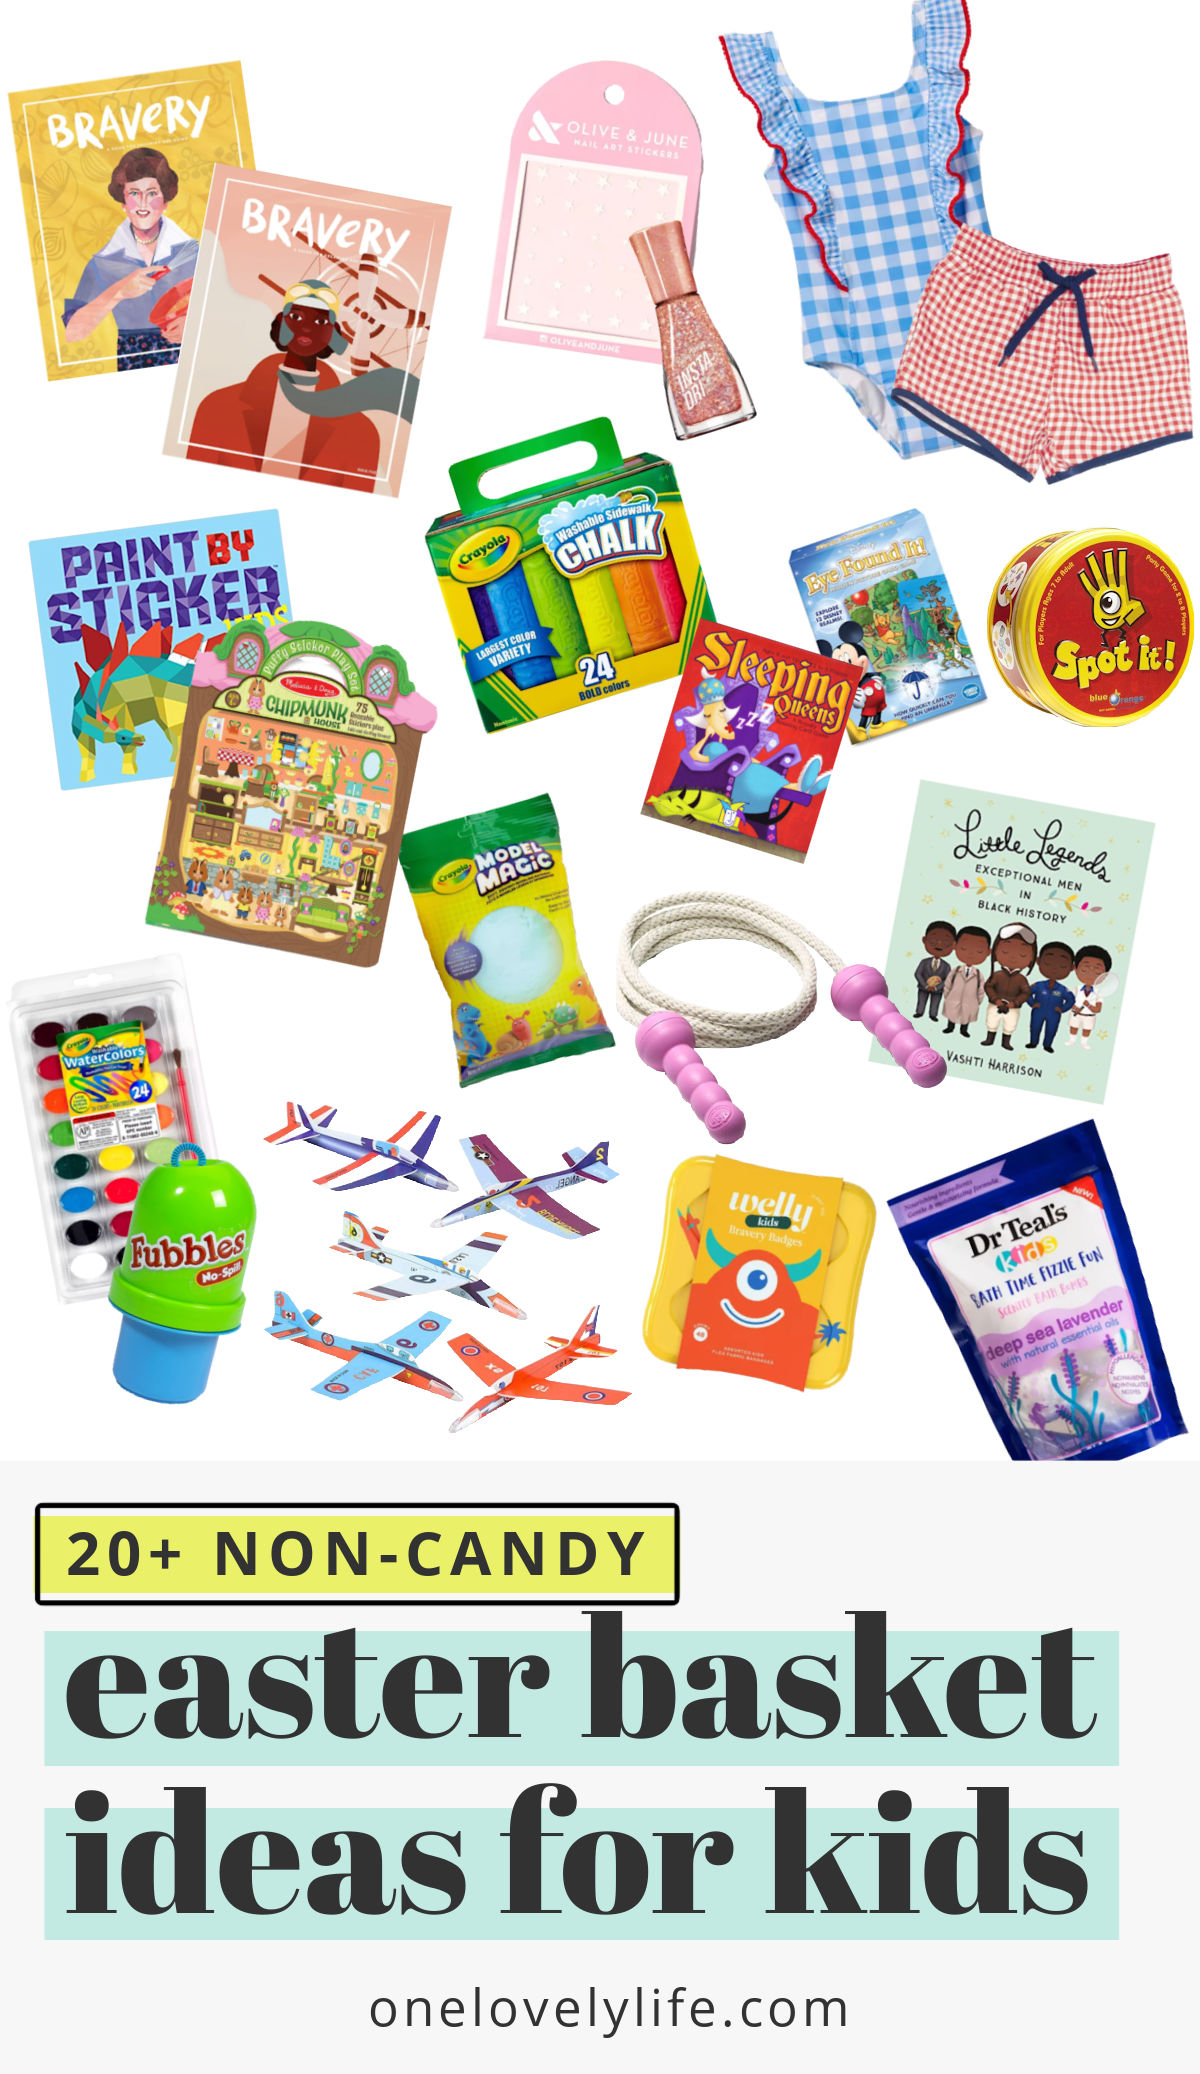 GREAT list of kids Easter basket ideas! No candy ideas for Easter from books to craft supplies, swimsuits, and more! // Easter Basket Ideas // Easter baskets for kids // boys easter baskets // girls easter baskets // Easter gifts #easterbaskets #easter #giftideas